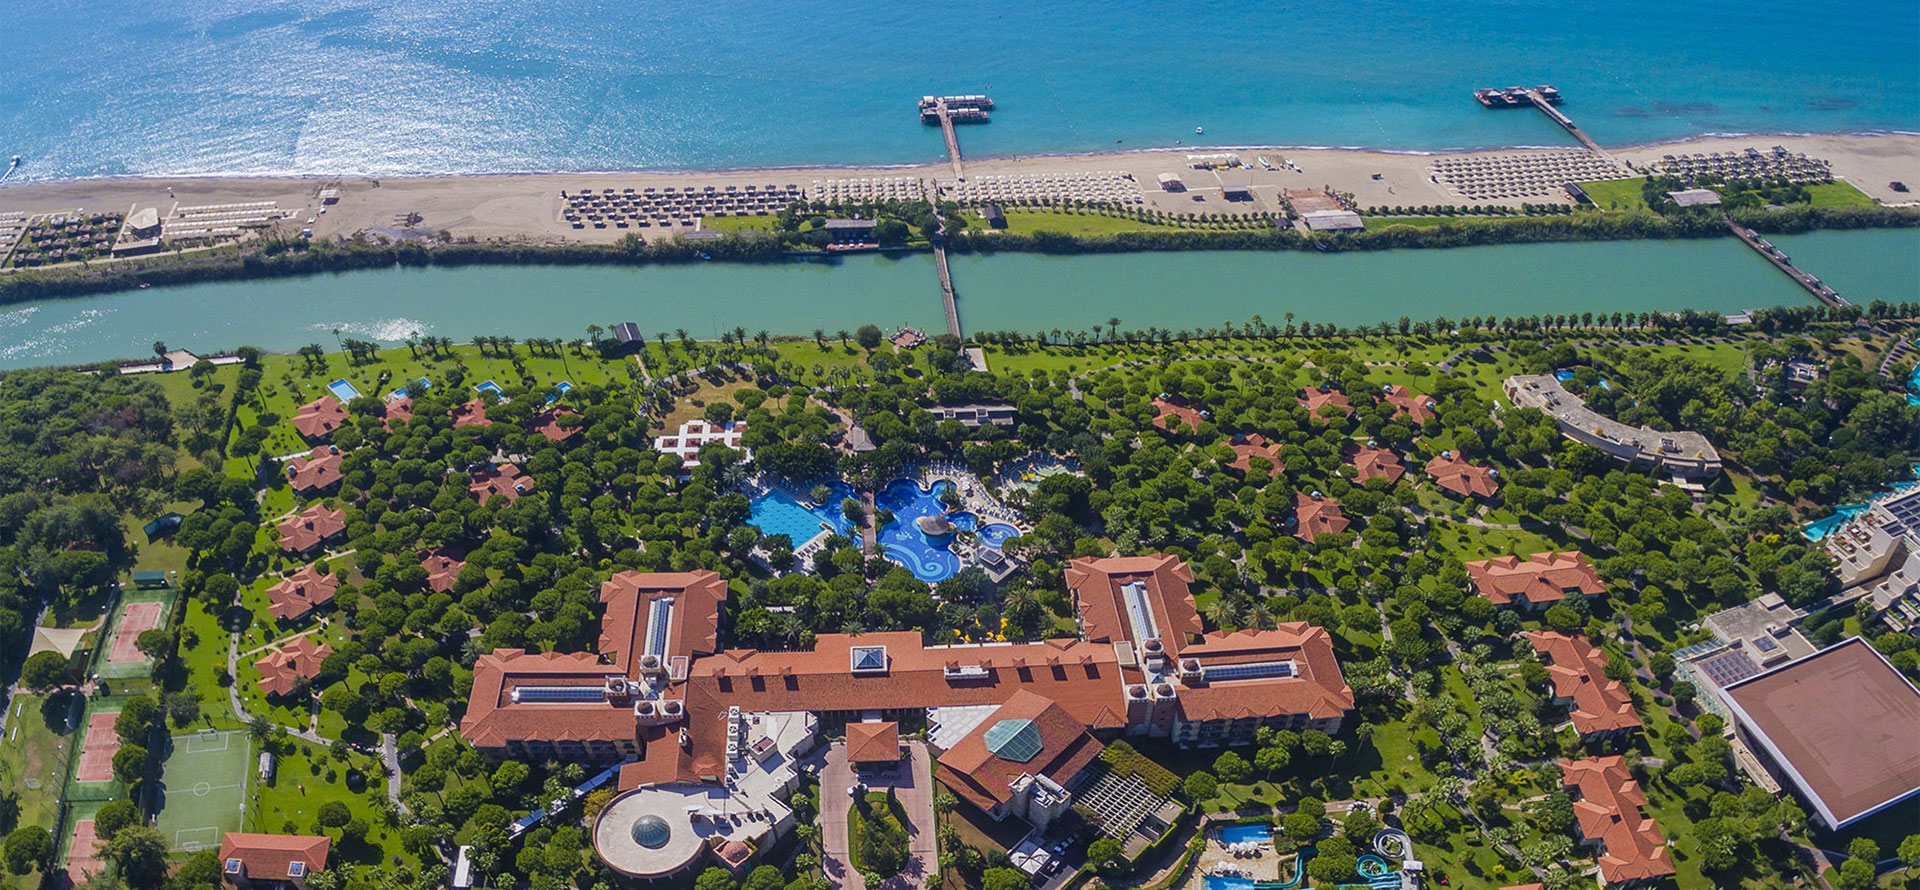 Top view of Turkey All inclusive resort.